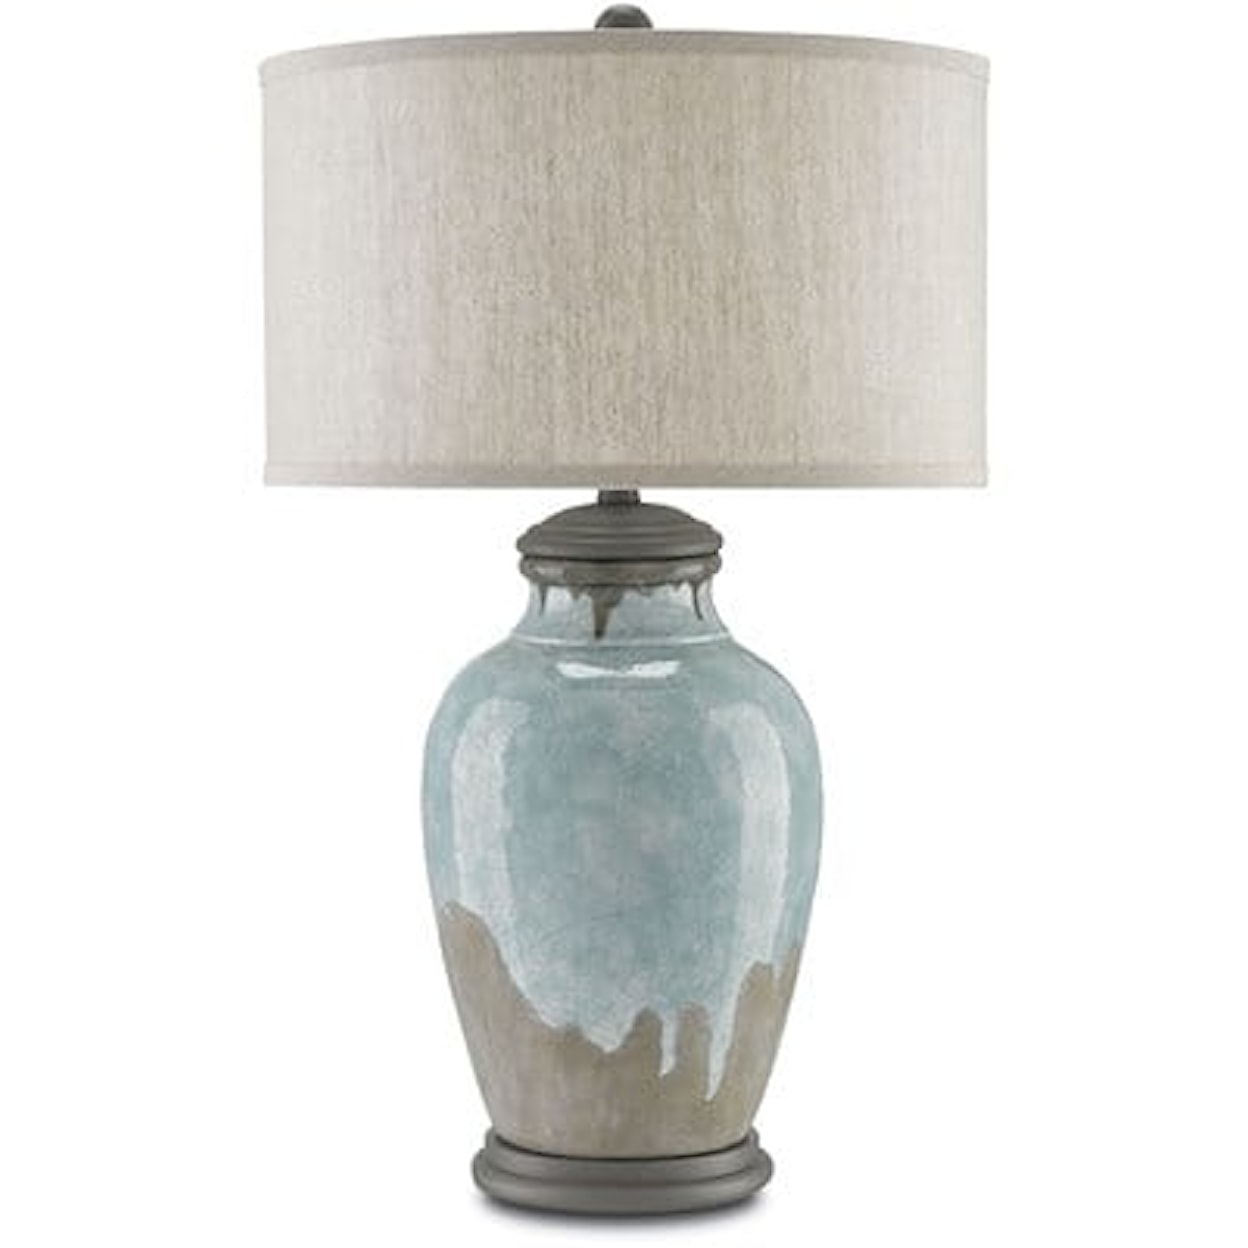 Currey & Co Lighting Table Lamps Chatswood Table Lamp